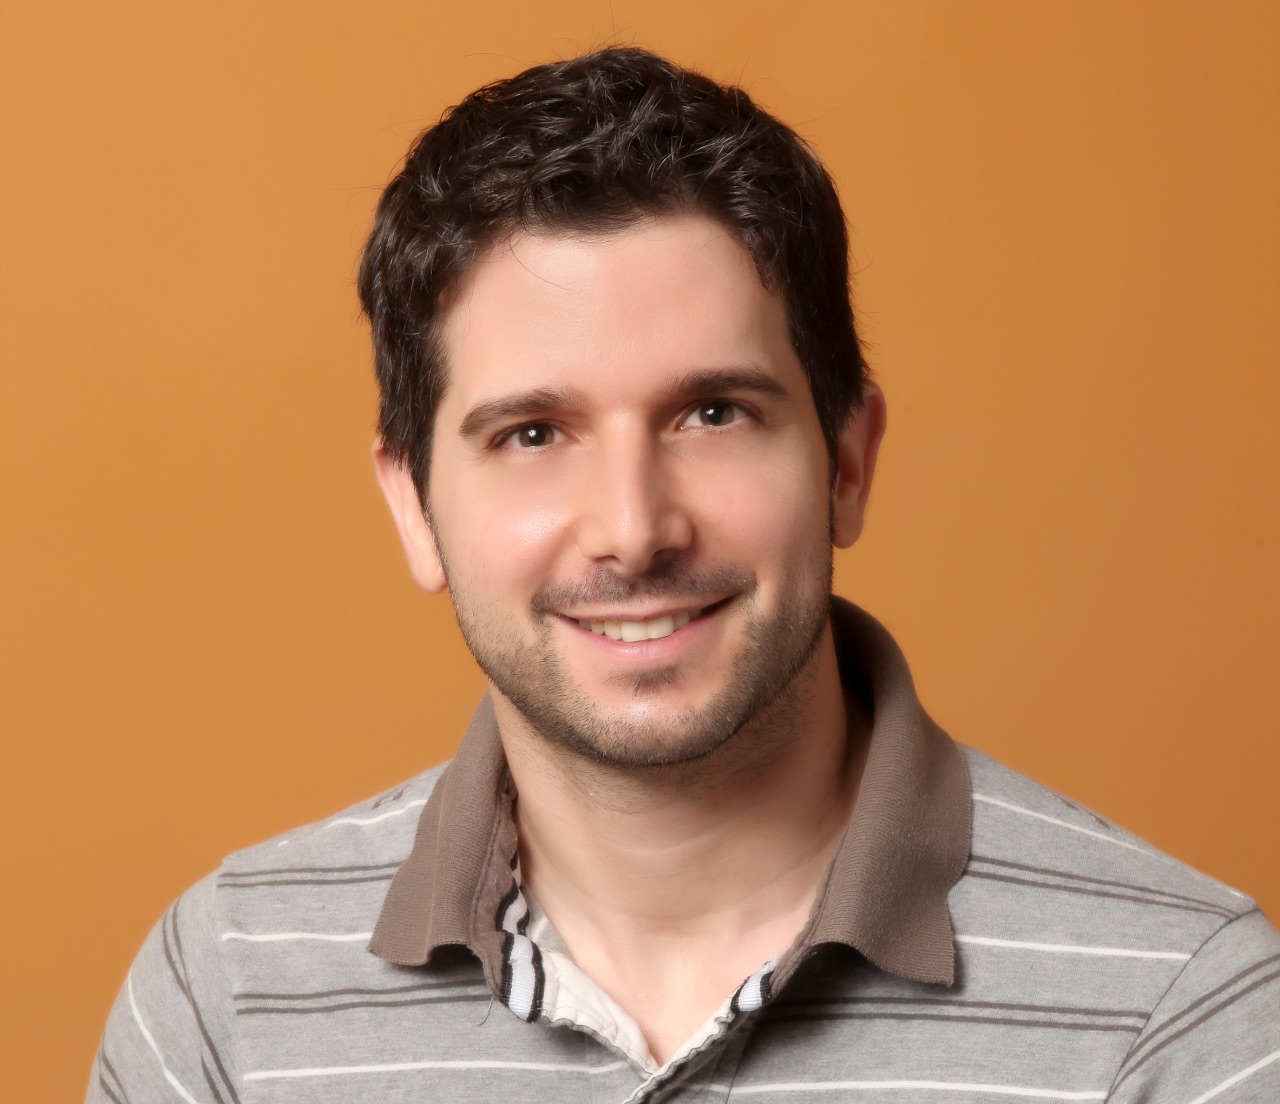 Product Manager at Outbrain, Idan Varkat